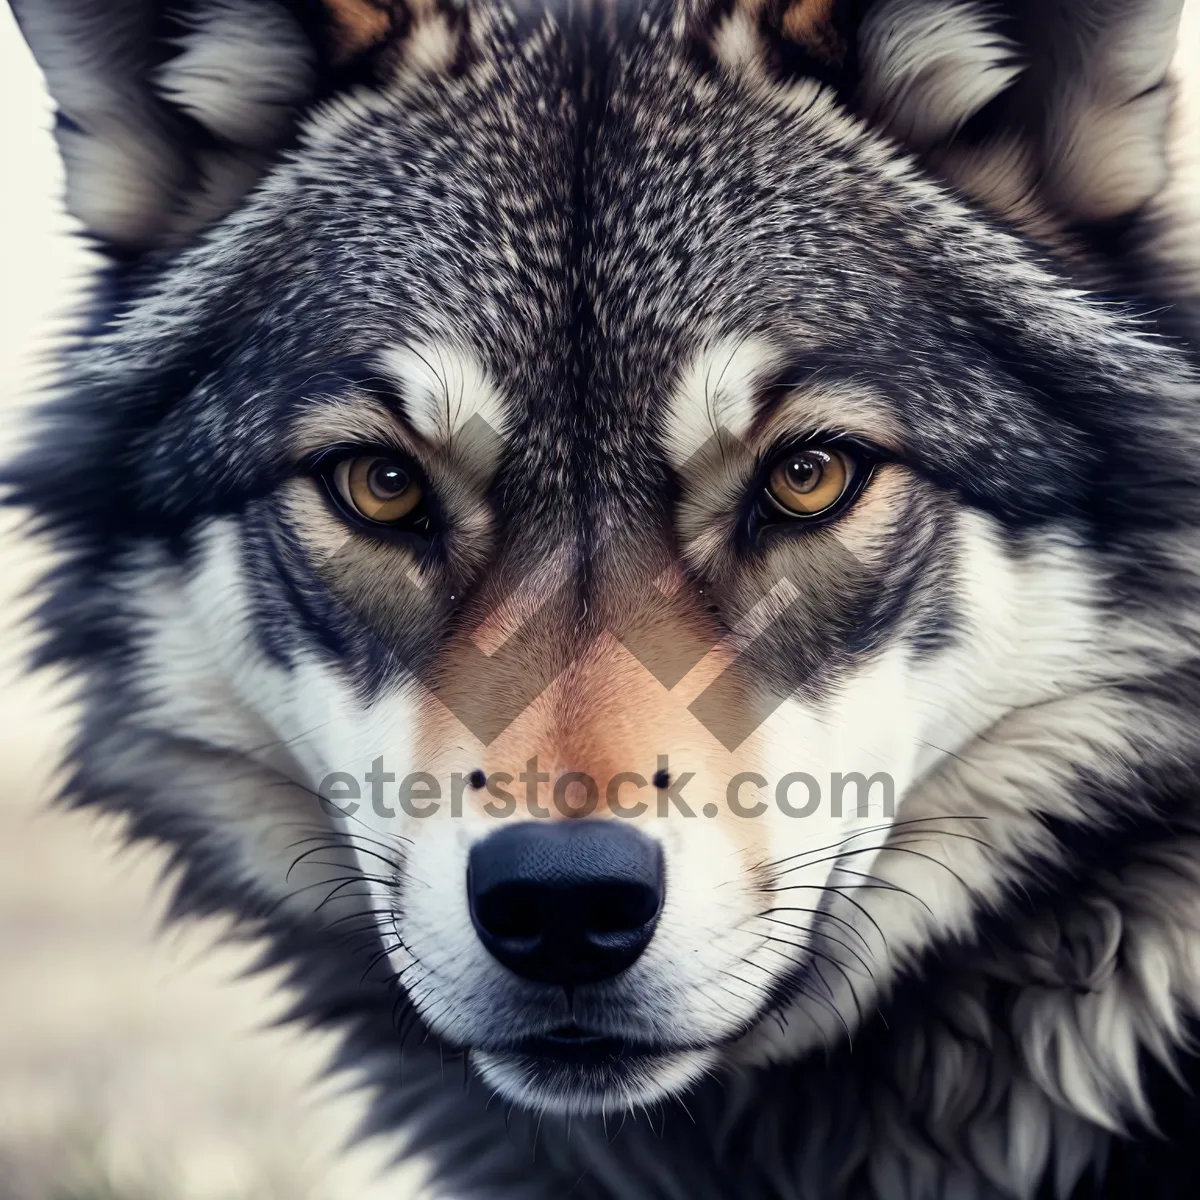 Picture of Majestic Malamute: Beautiful Purebred Sled Dog with Piercing Eyes